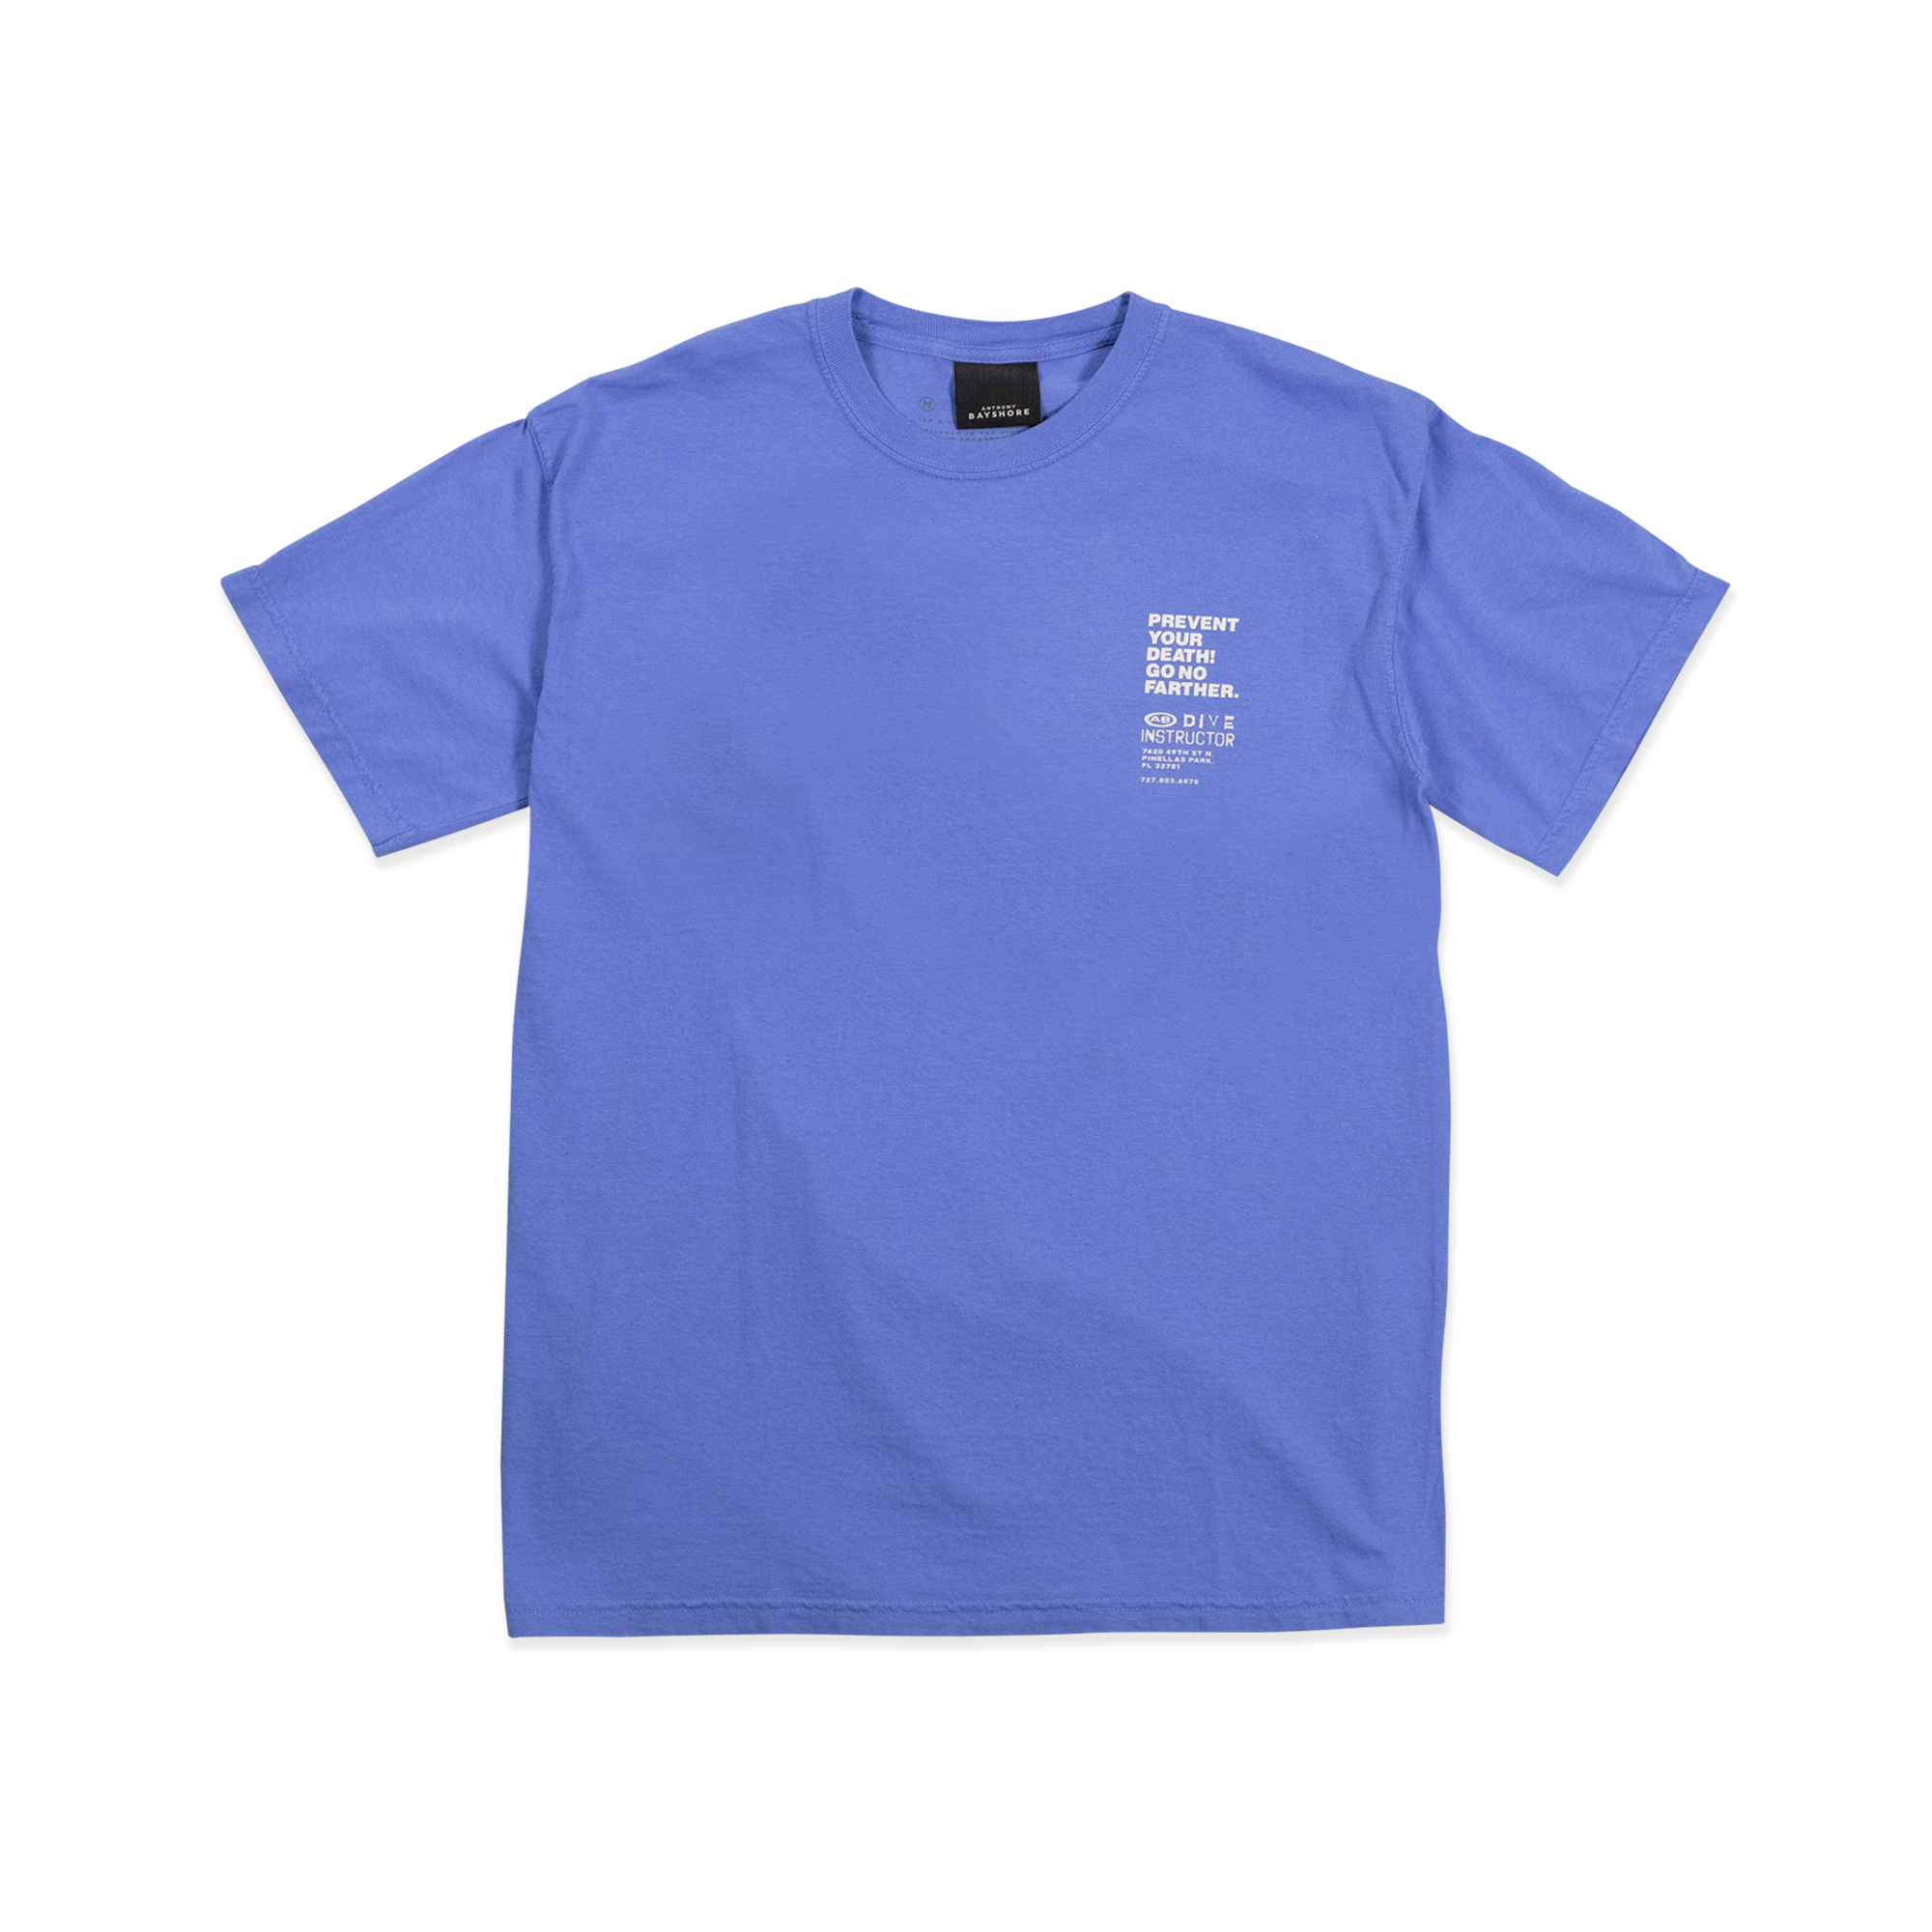 "Prevent Your Death" TEE - Mystic Blue